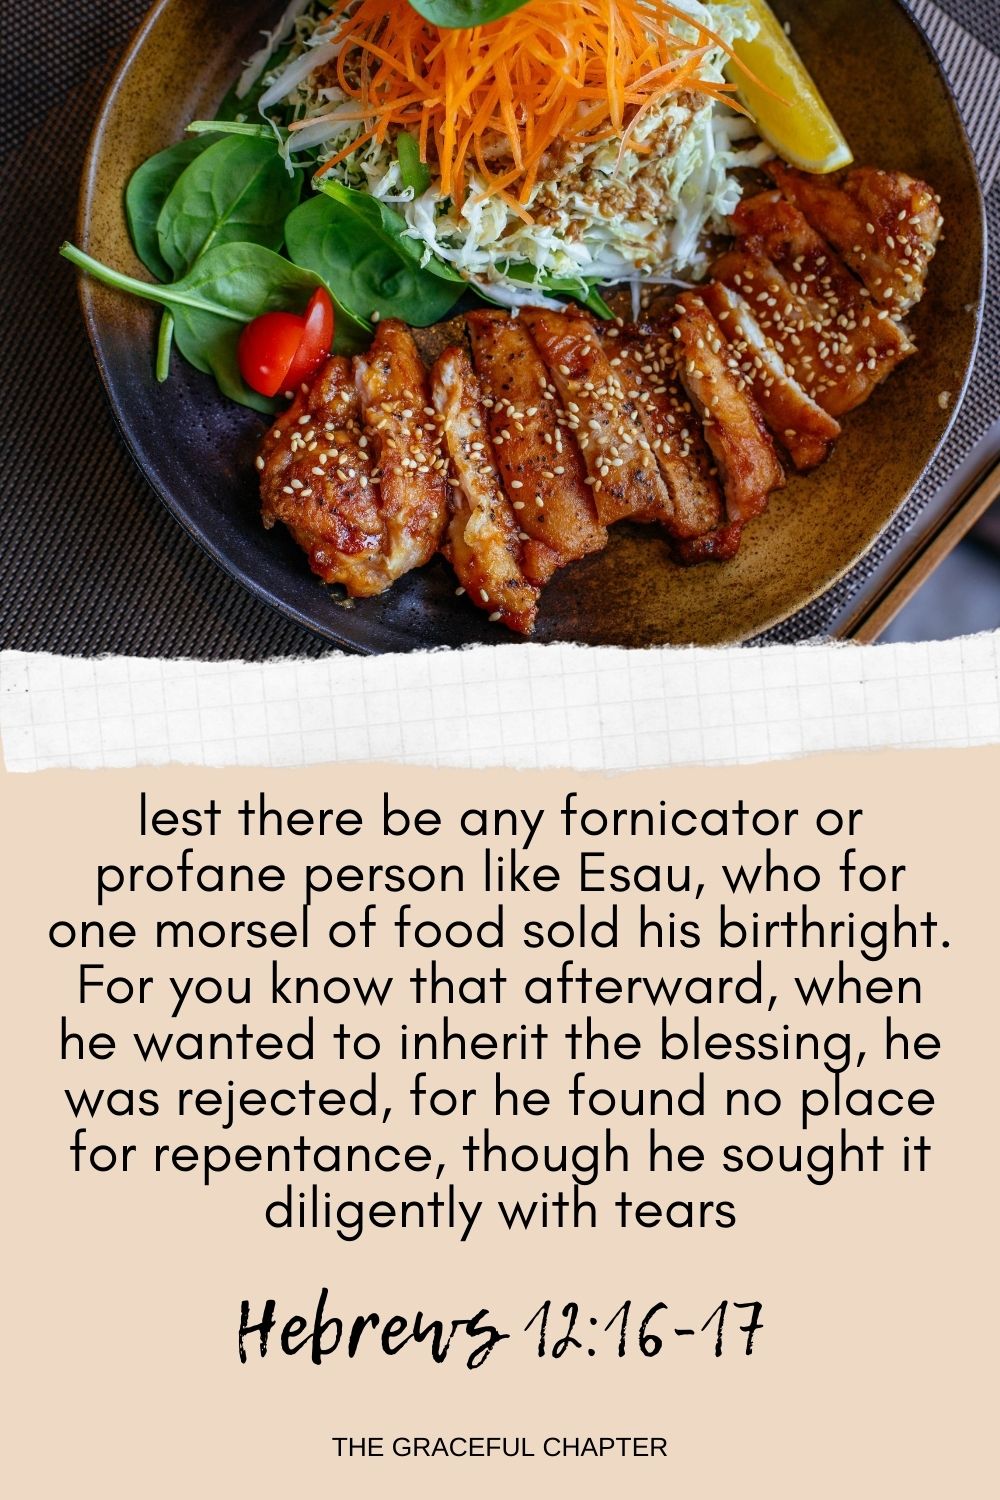 lest there be any fornicator or profane person like Esau, who for one morsel of food sold his birthright. For you know that afterward, when he wanted to inherit the blessing, he was rejected, for he found no place for repentance, though he sought it diligently with tears. Hebrews 12:16-17